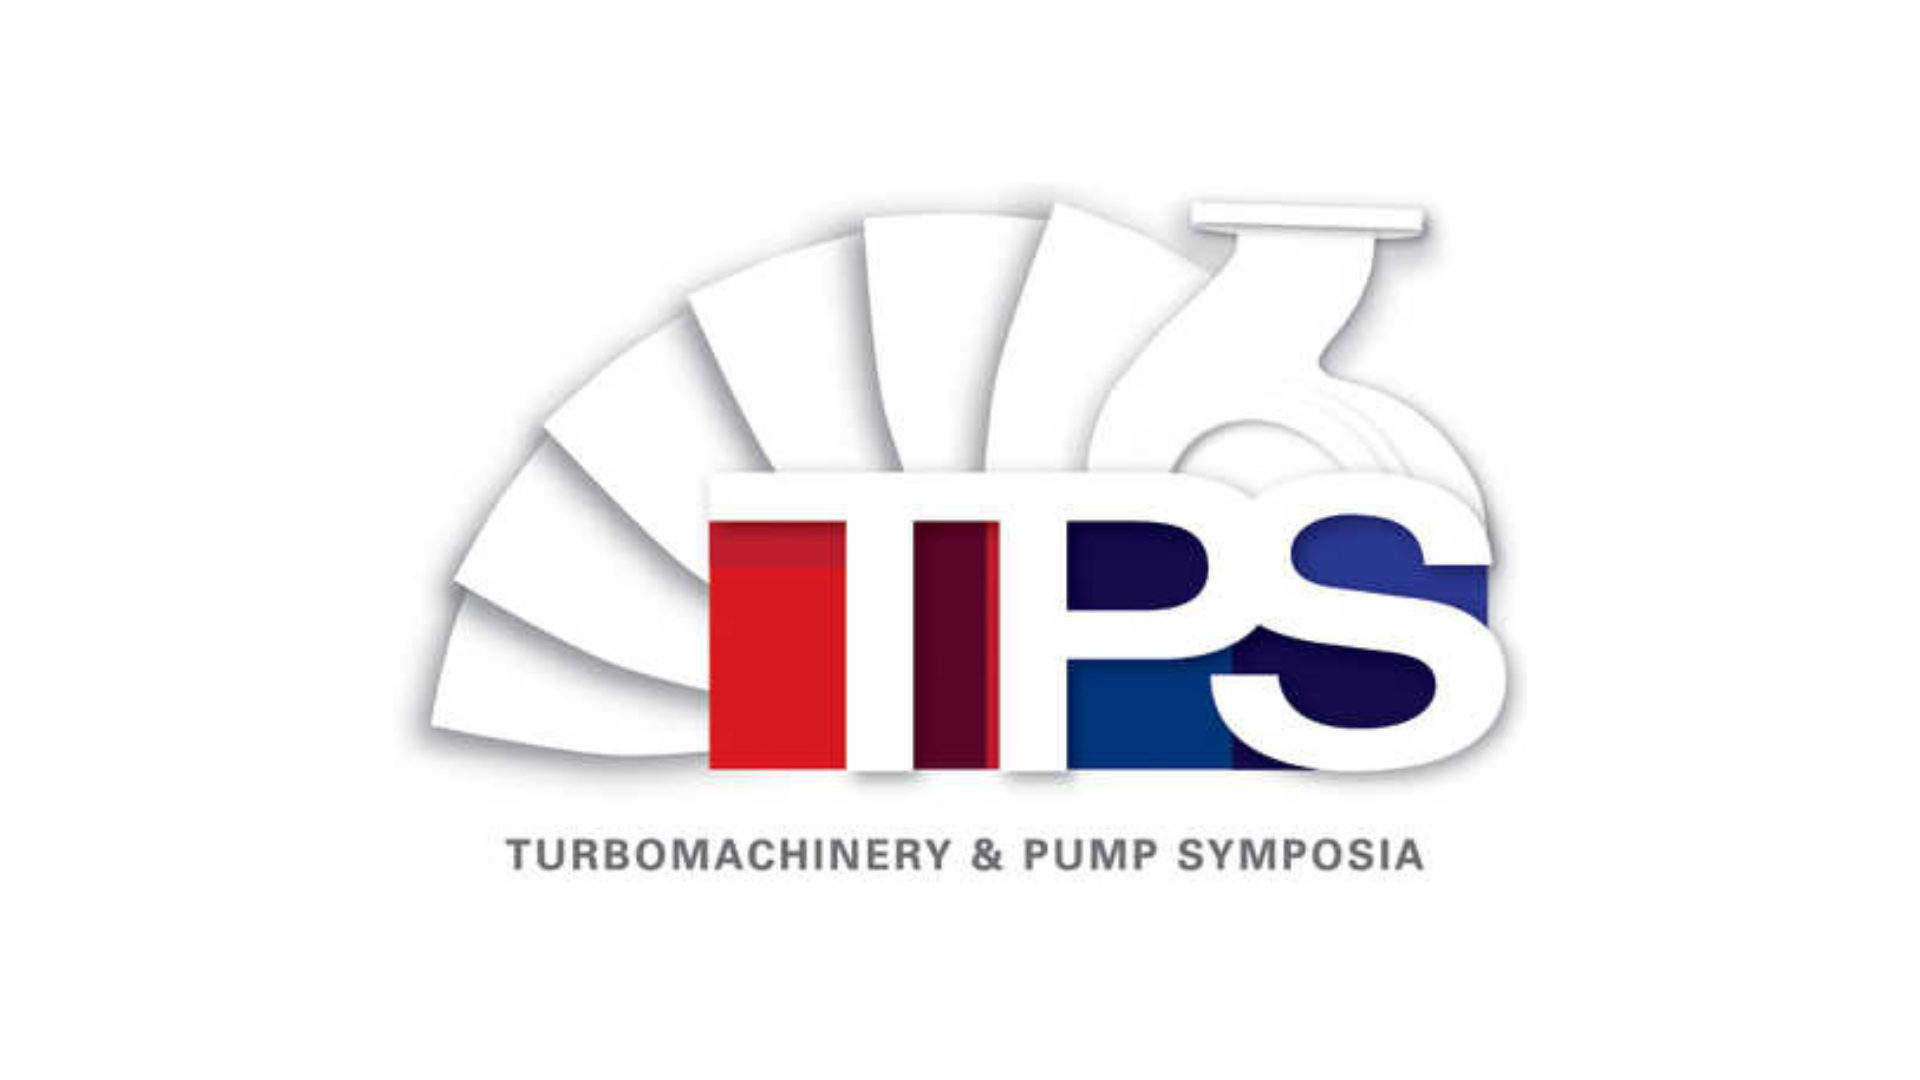 MSHS at the 2023 Turbomachinery & Pump Symposia